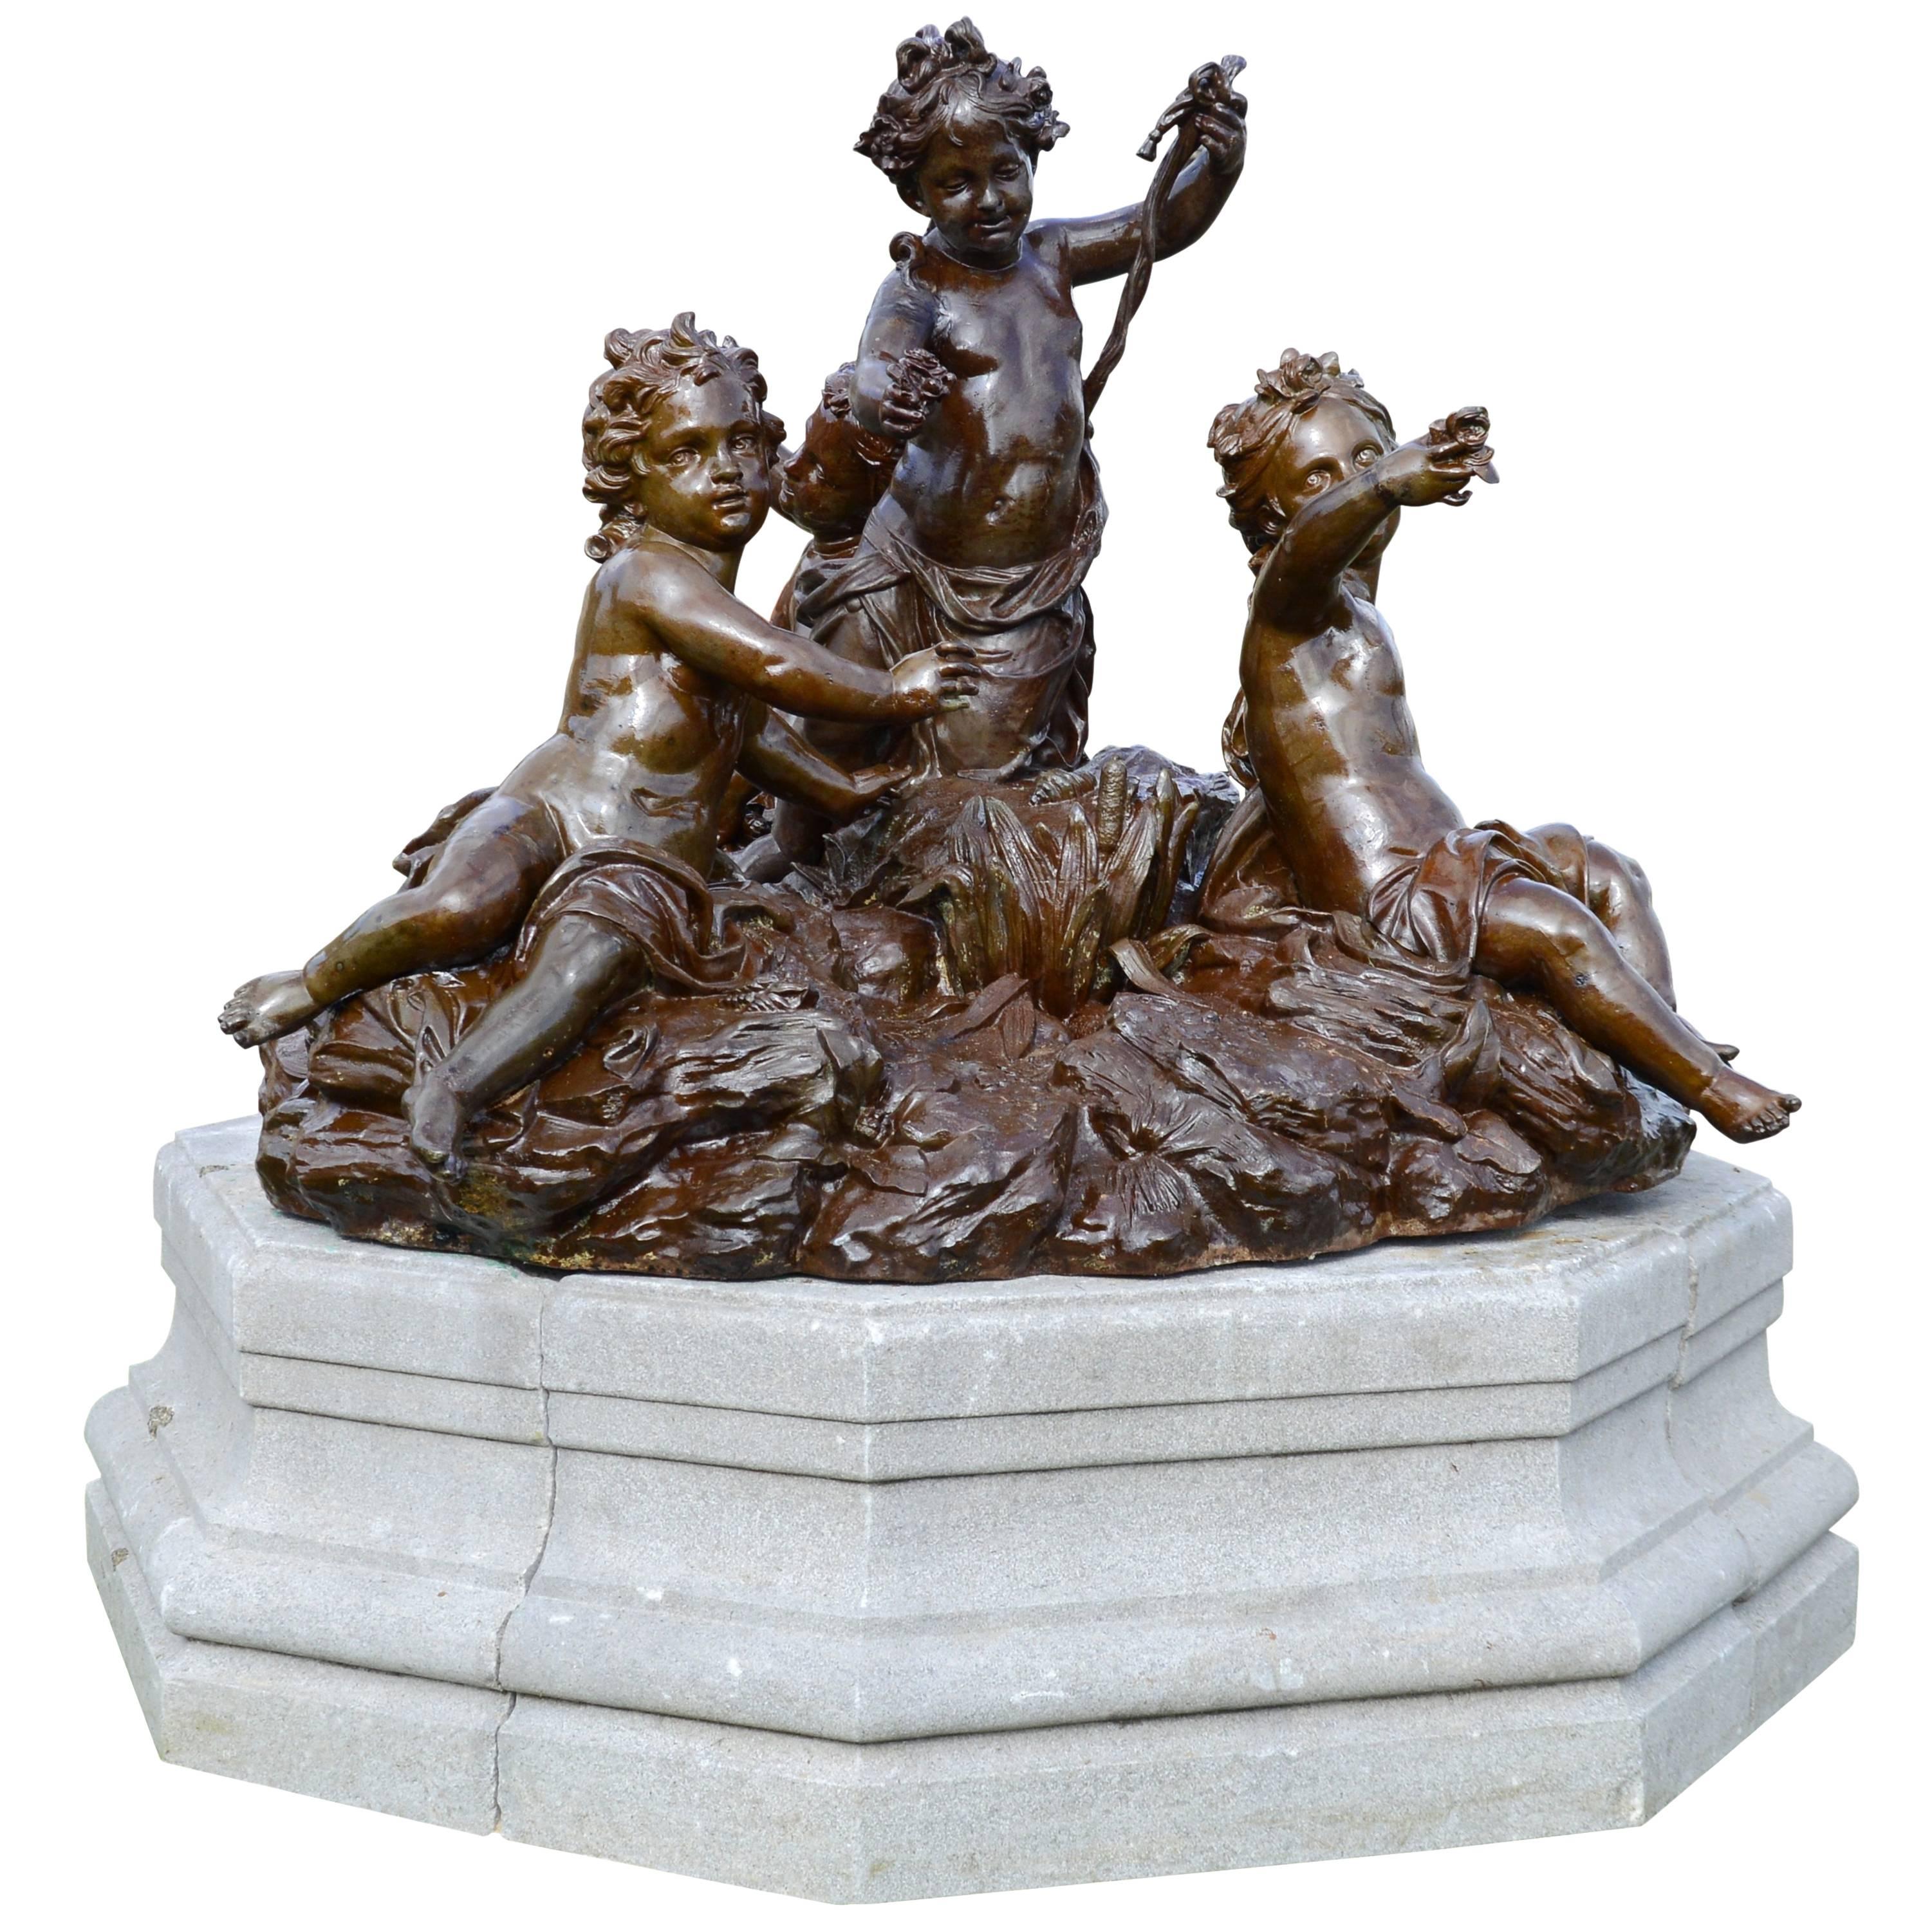 Important Cast Iron Group of Puttti Resting on a Granite Pedestal, 19th Century